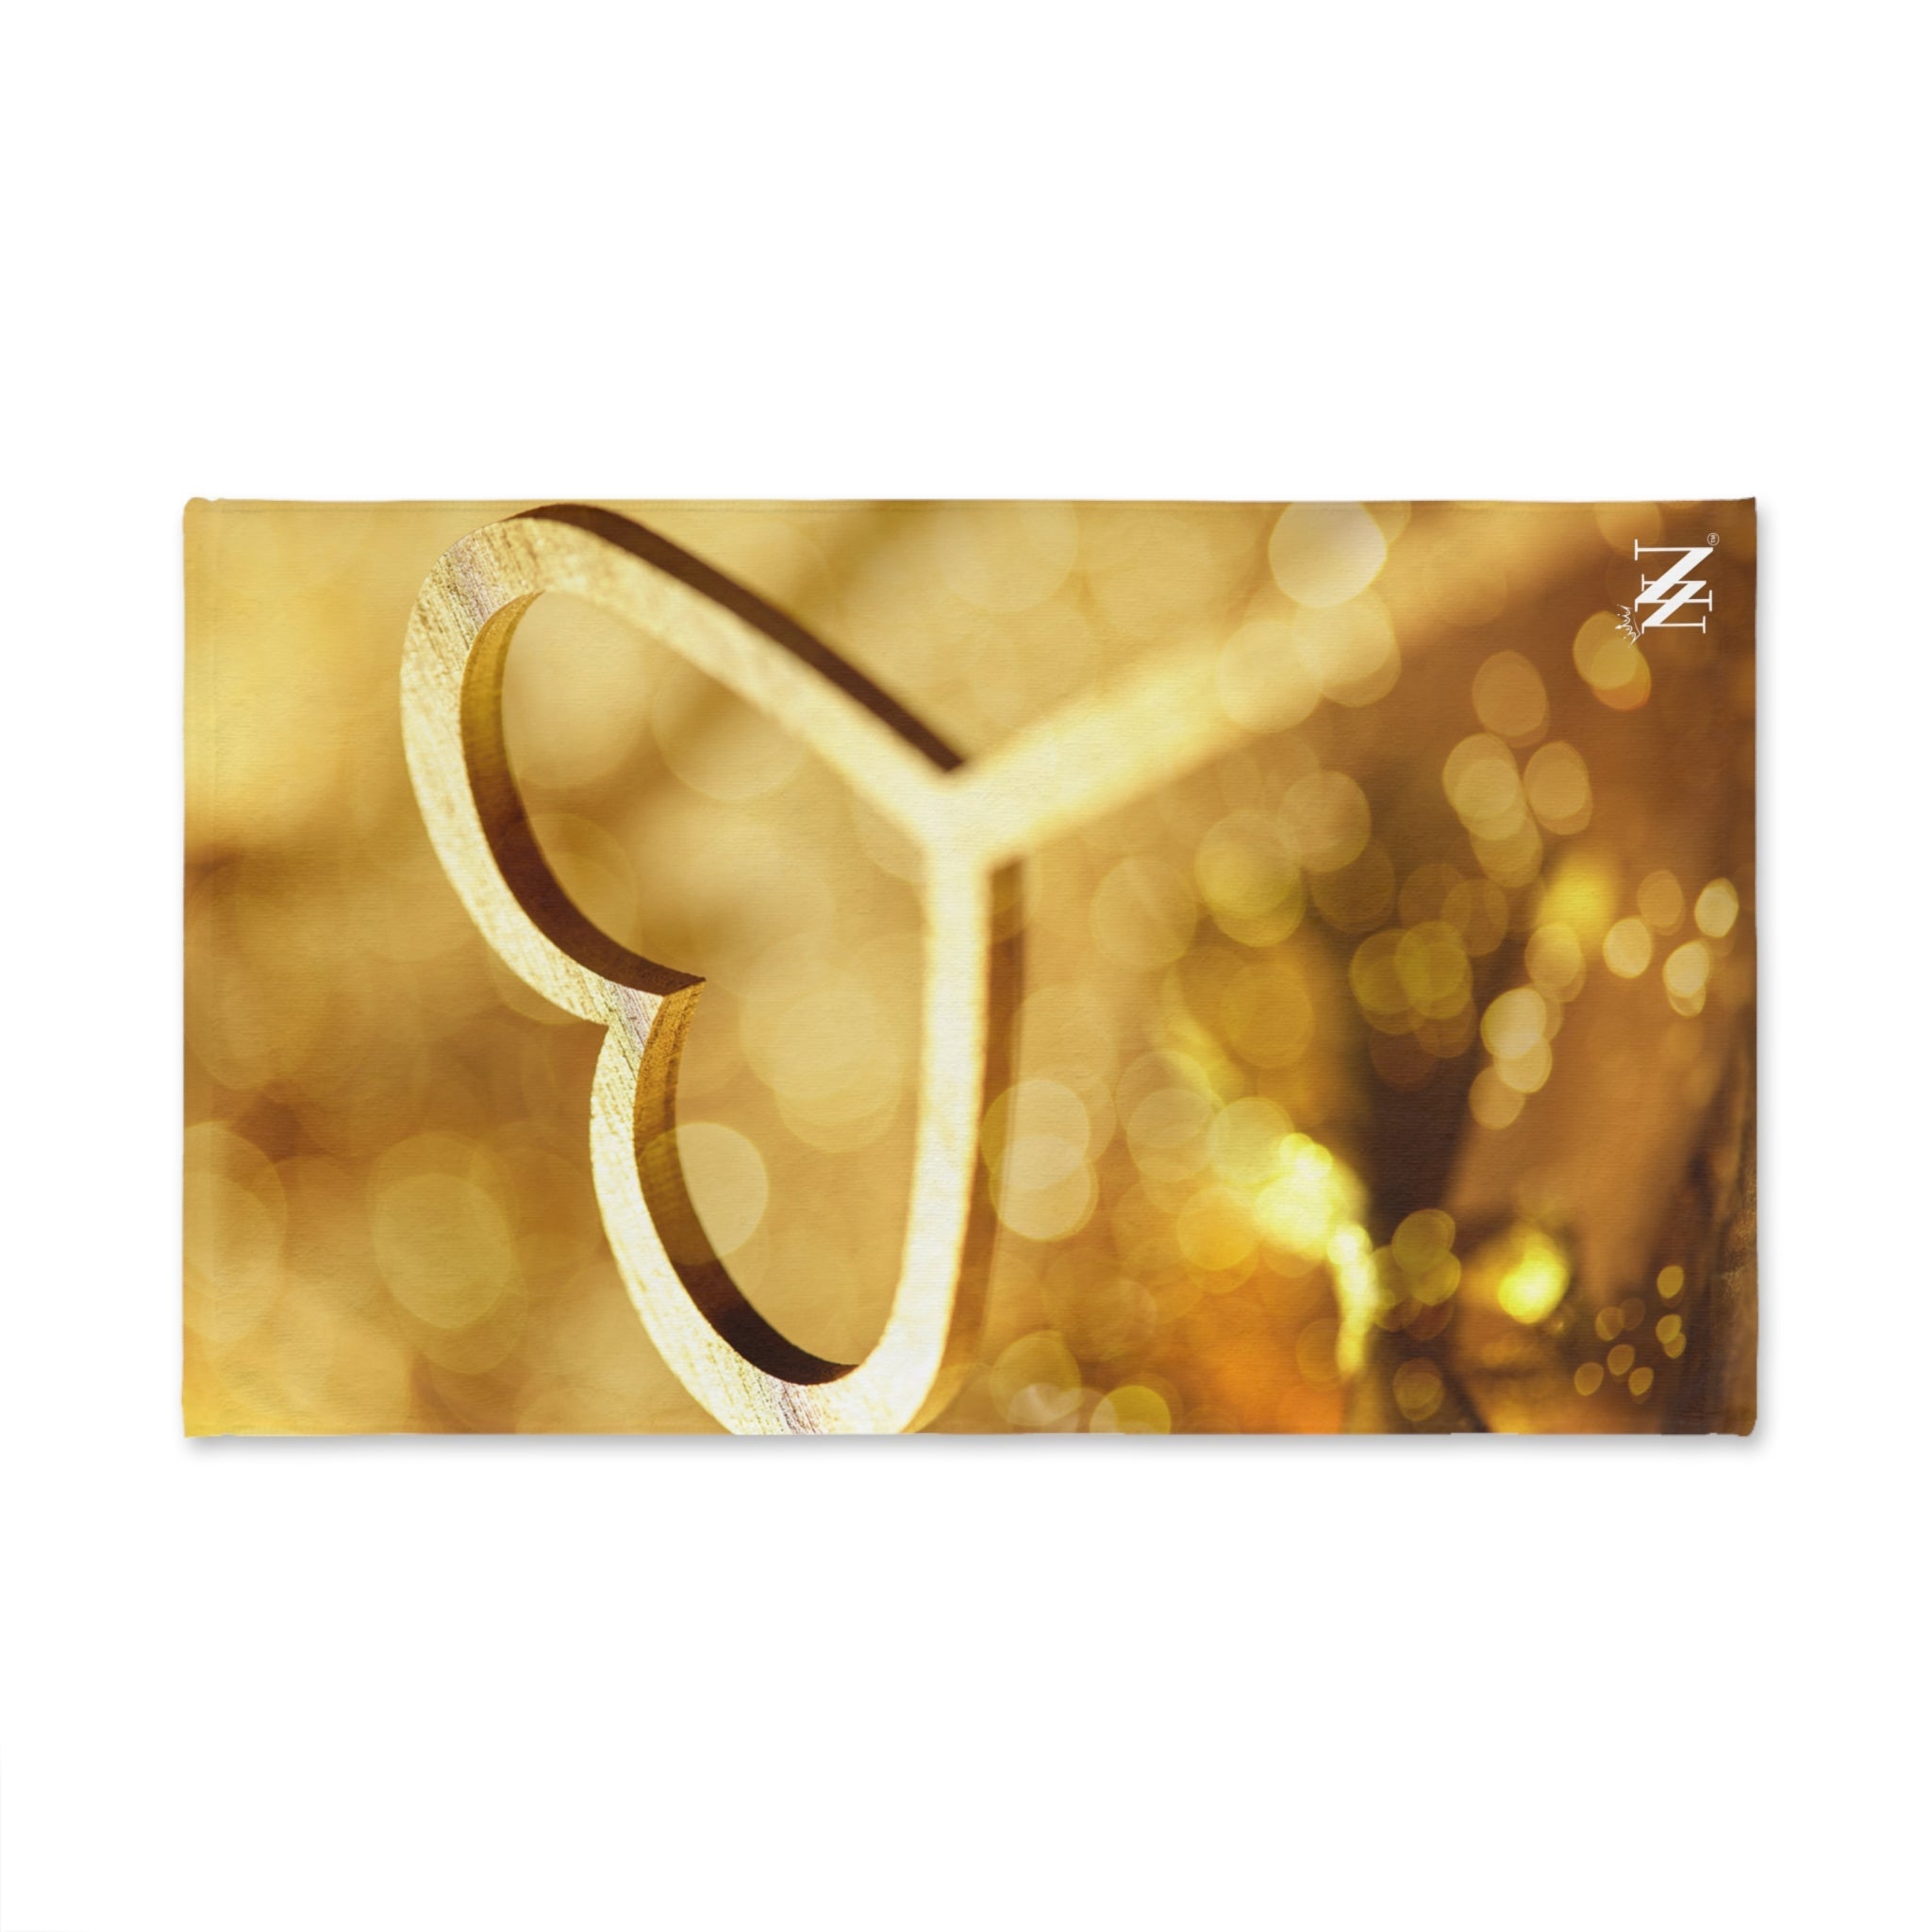 Gold Heart Key White | Funny Gifts for Men - Gifts for Him - Birthday Gifts for Men, Him, Her, Husband, Boyfriend, Girlfriend, New Couple Gifts, Fathers & Valentines Day Gifts, Christmas Gifts NECTAR NAPKINS